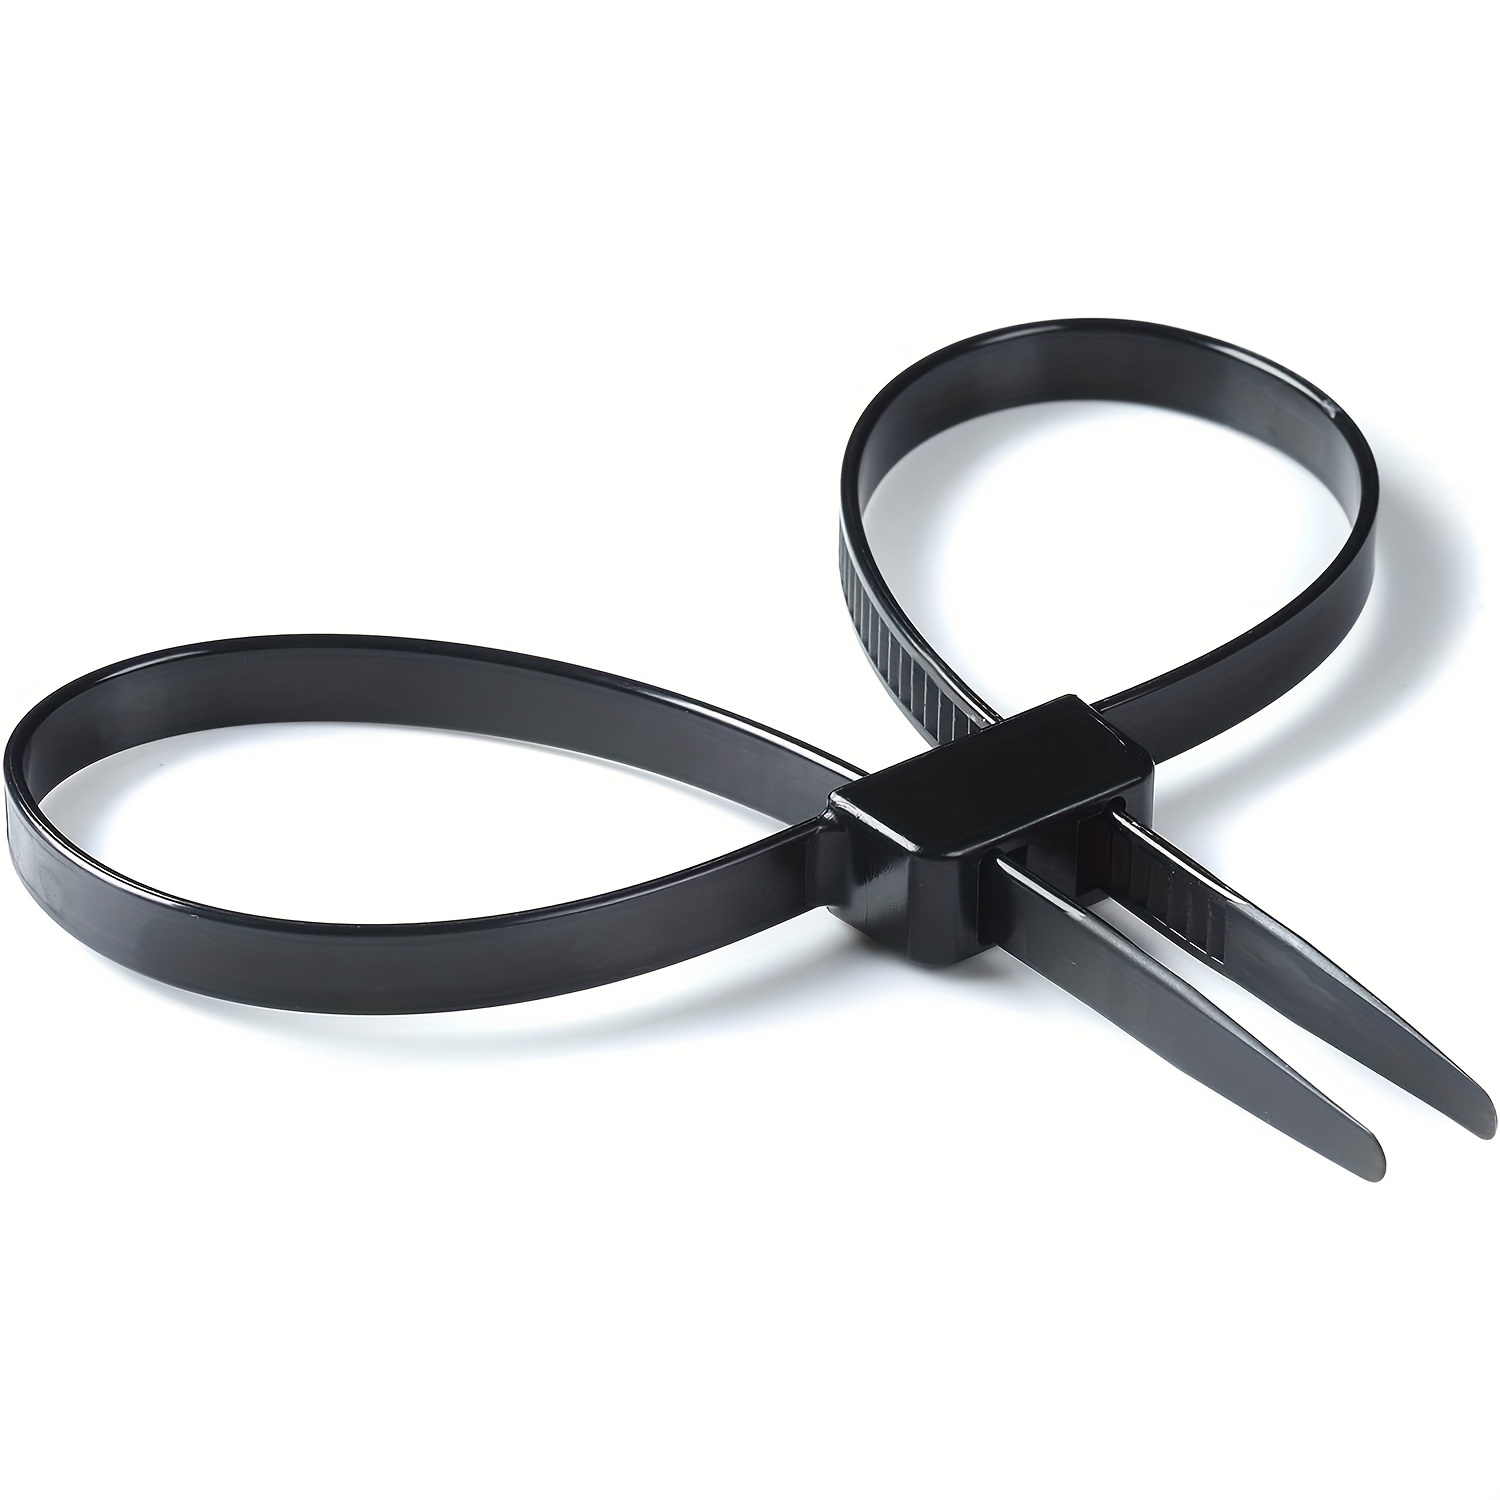 

2pcs Heavy Duty Strong Police Zip Tie Handcuffs Disposable Nylon Double Locking Cuffs Black Plastic Cable Ties, 250-lbs Tensile Strength